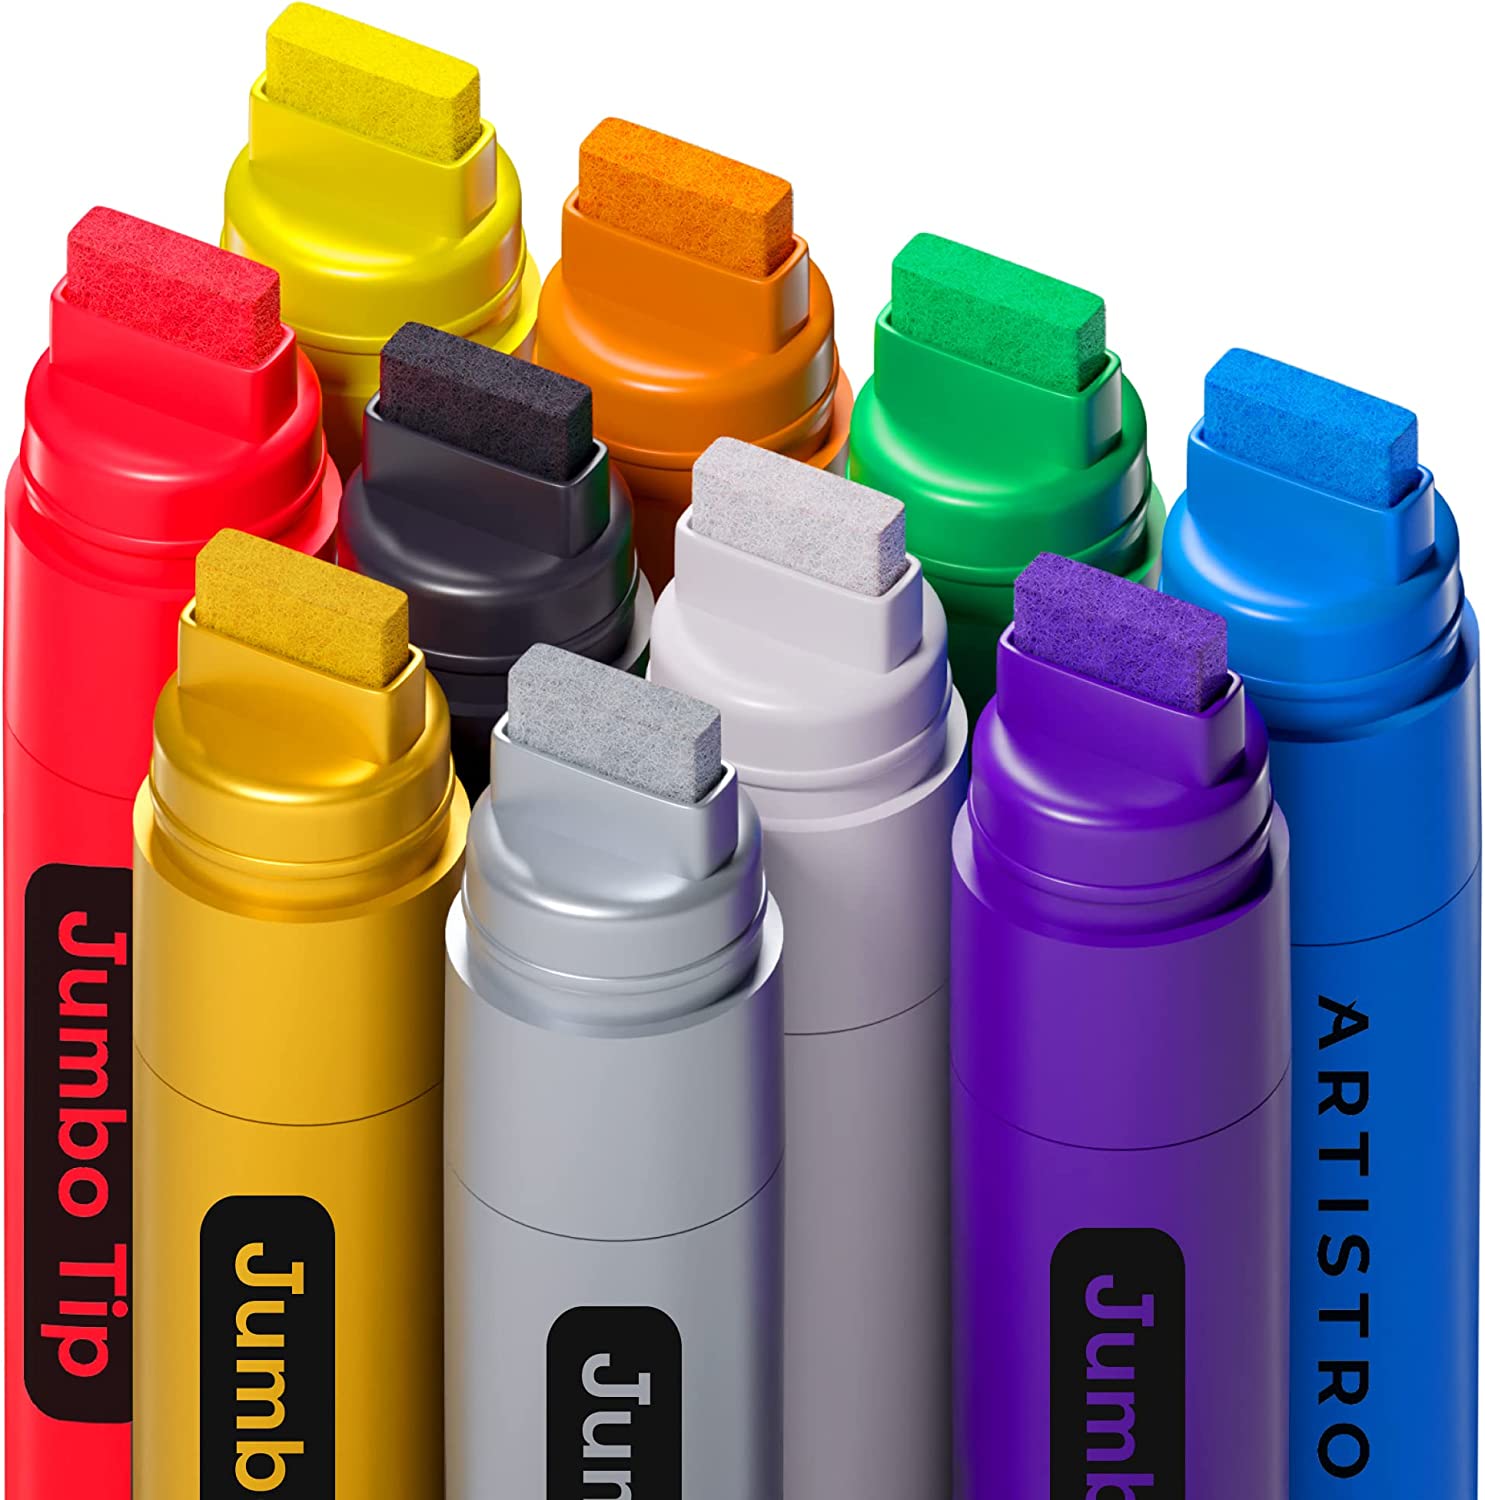 product 10 colored jumbo art markers